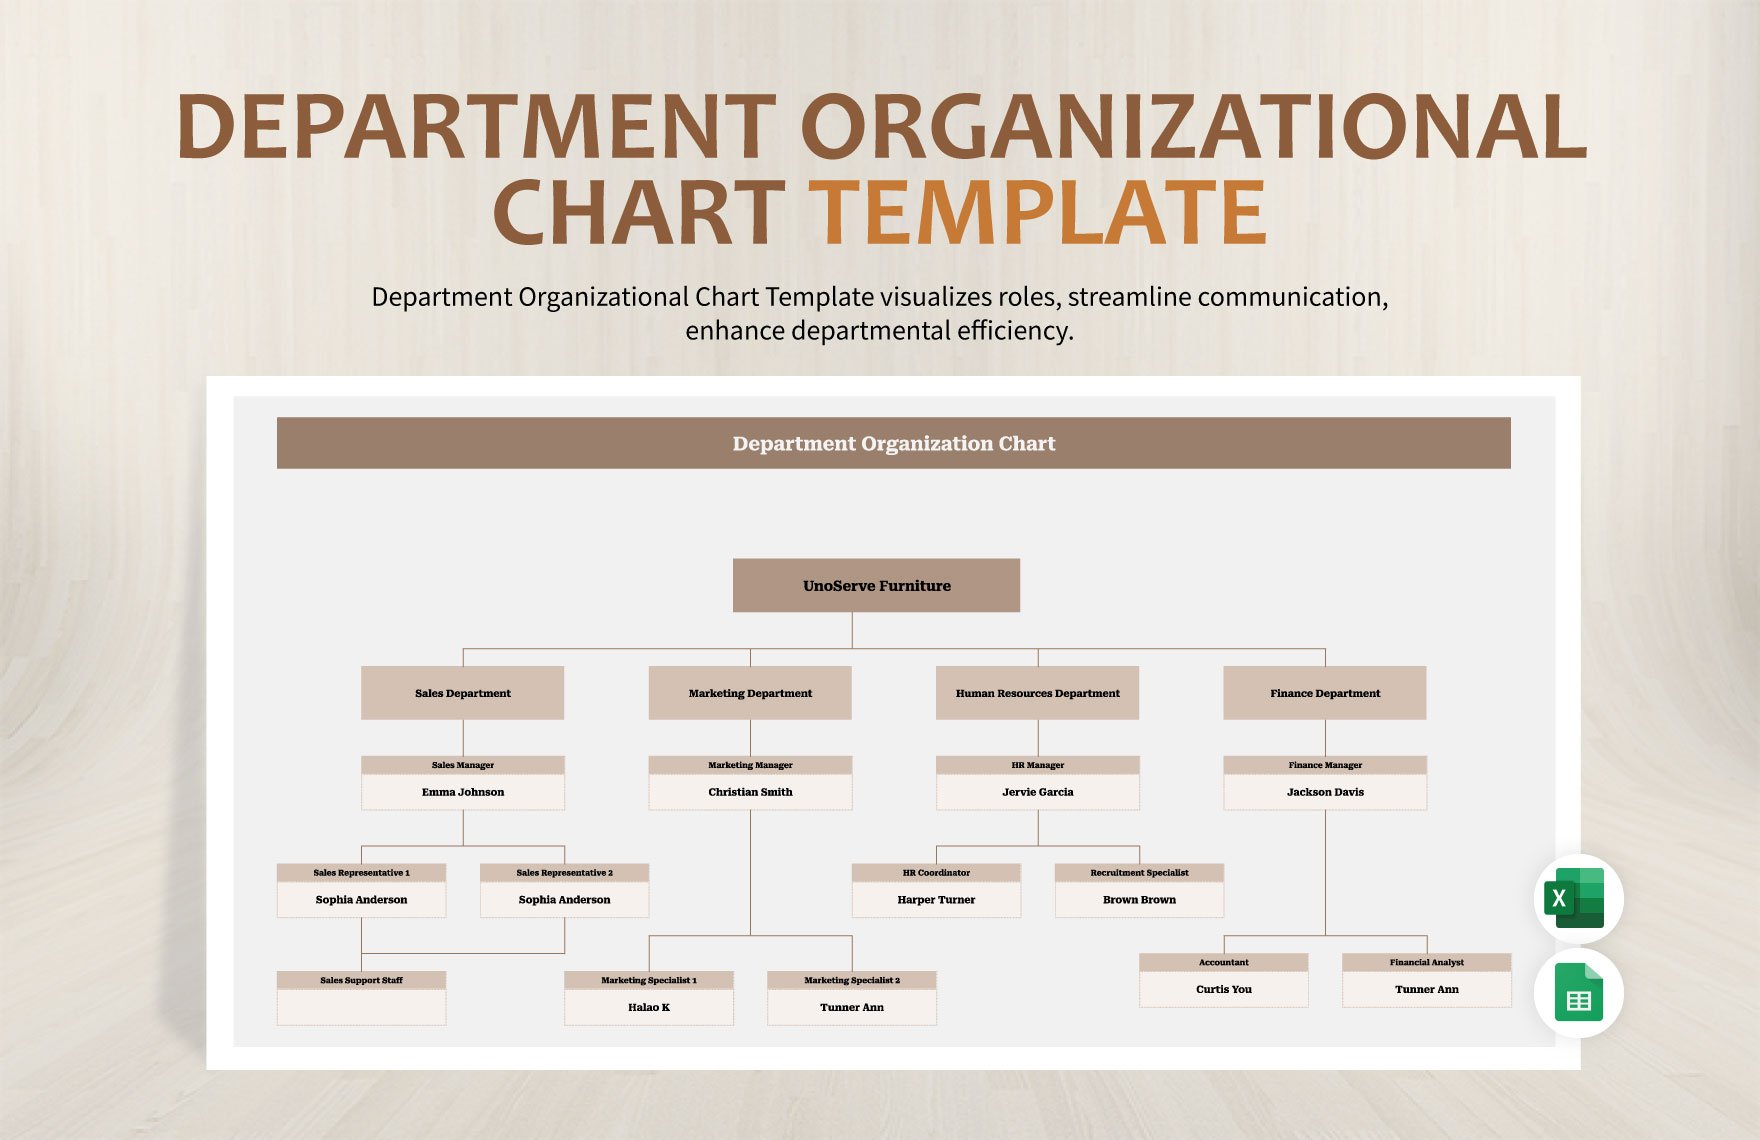 Department Organizational Chart Template in Excel, Google Sheets